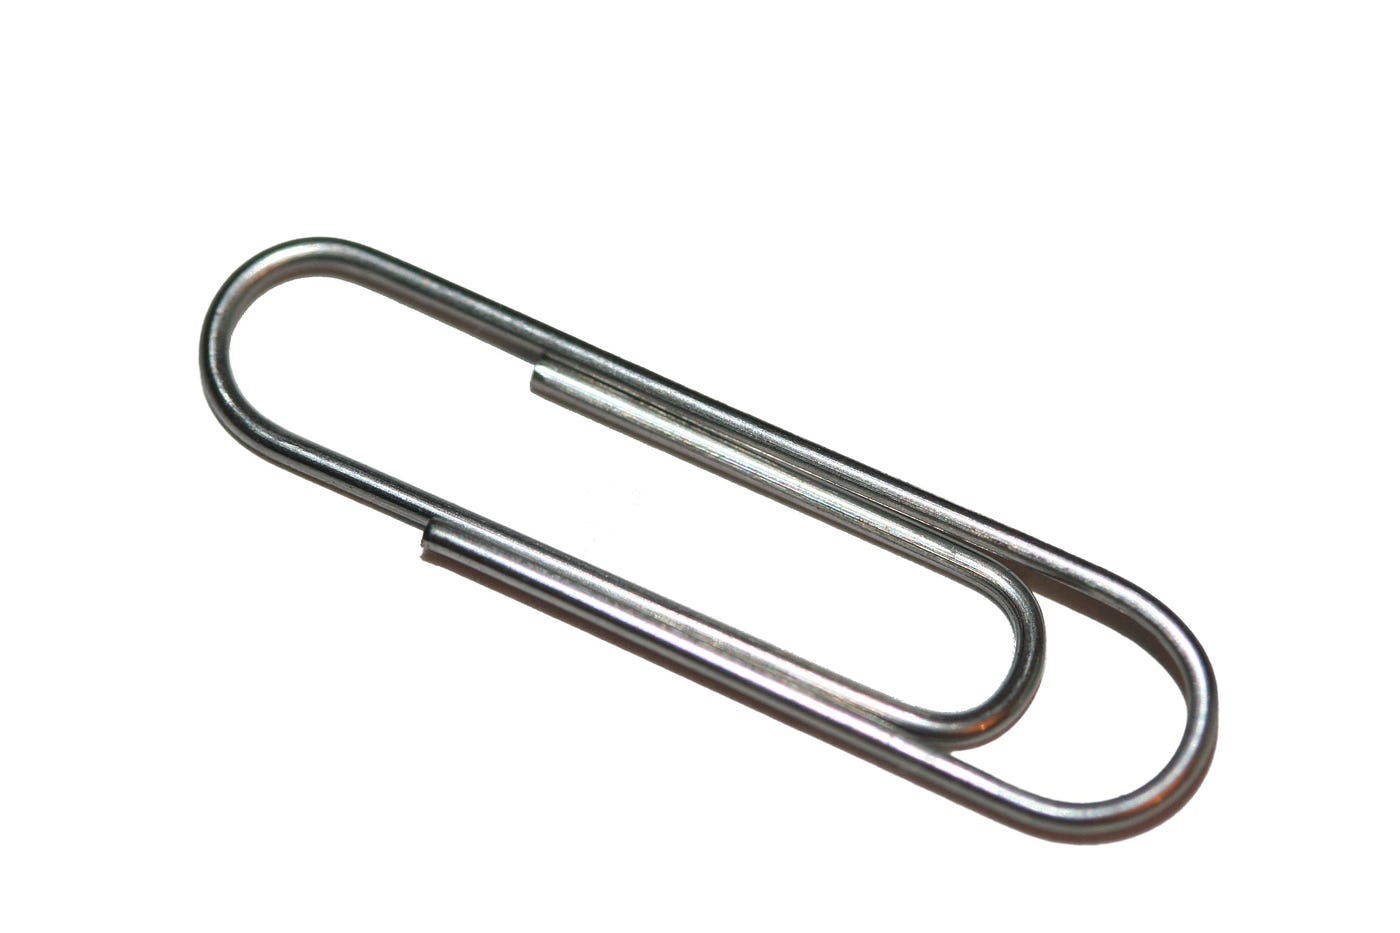 The history of the paper clip: It was invented in 1899. It hasn't